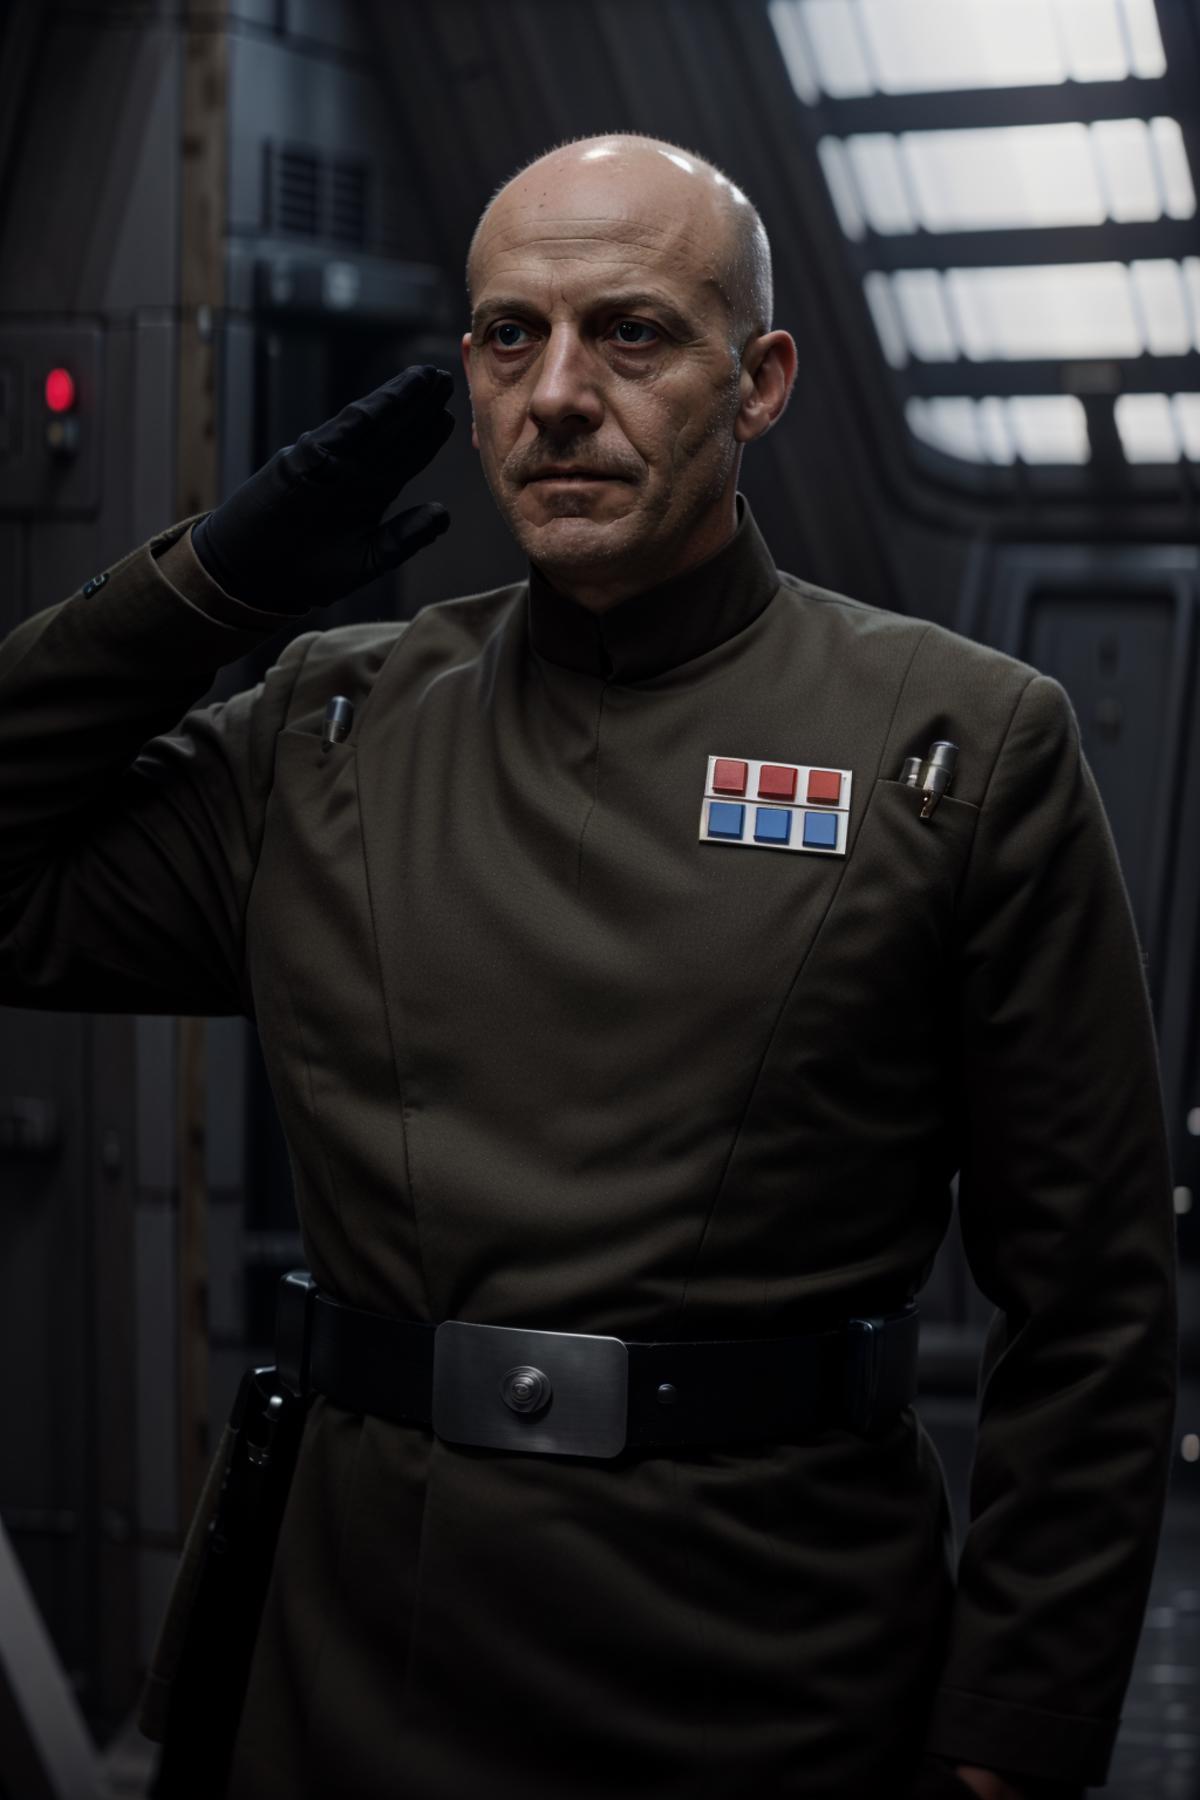 Star Wars imperial officer uniform image by impossiblebearcl4060